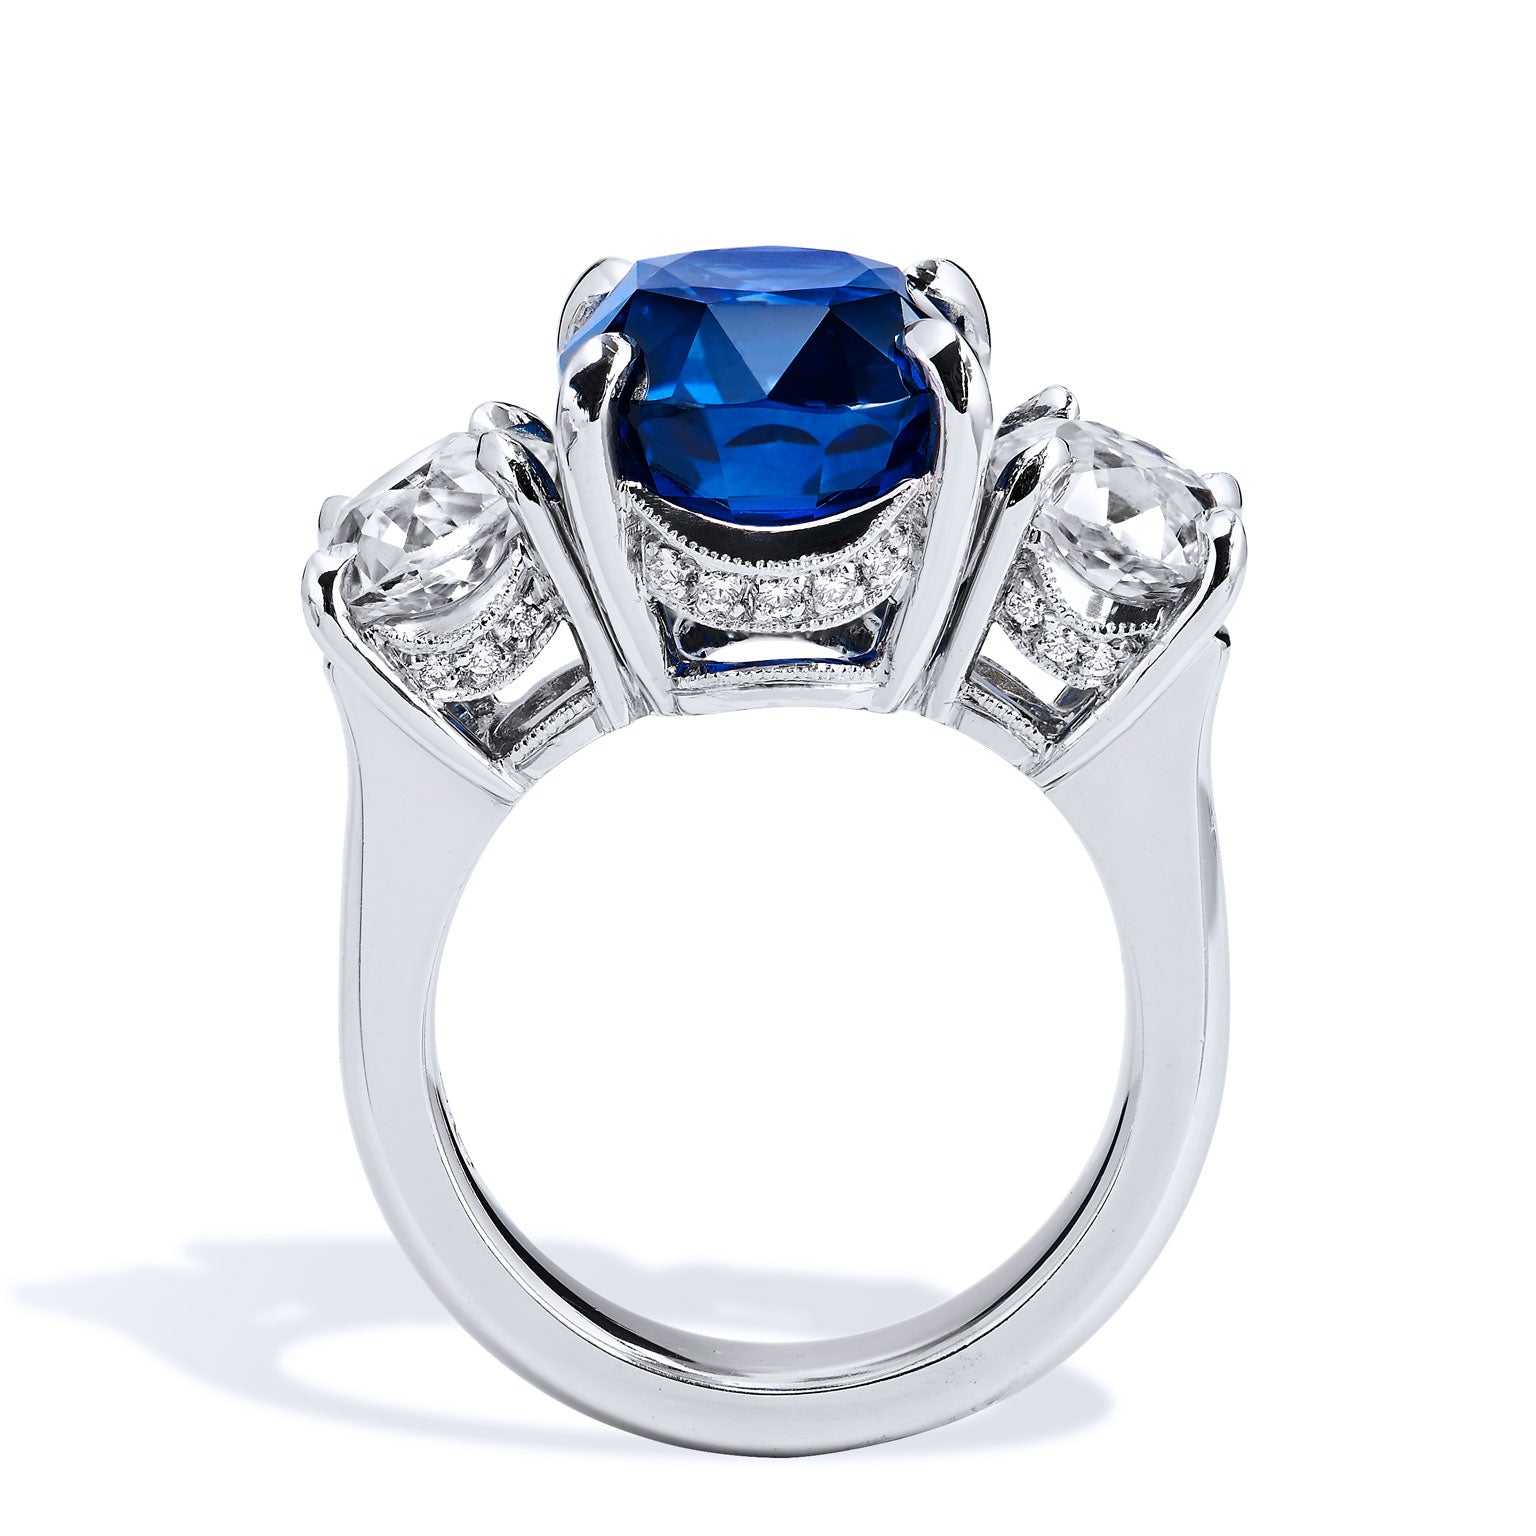 10.16ct Royal Deep Blue Sapphire and Antique Cushion Diamond Ring Rings H&amp;H Jewels